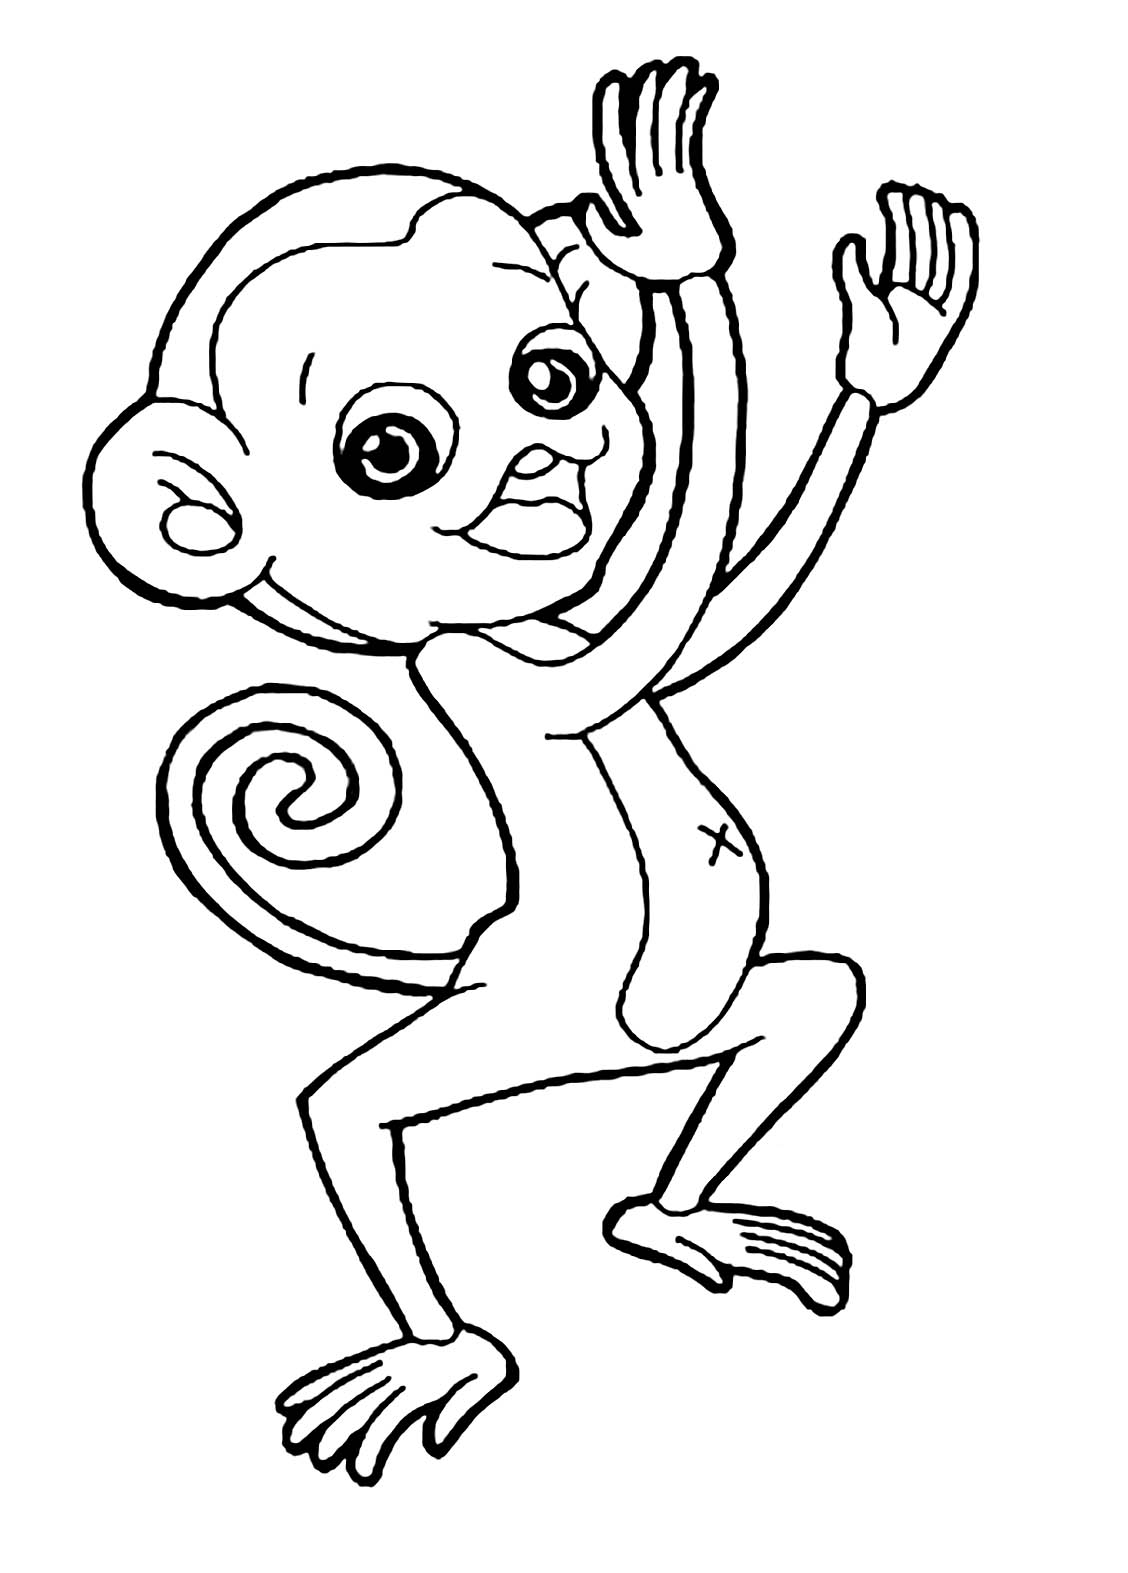 Super simple monkey coloring page